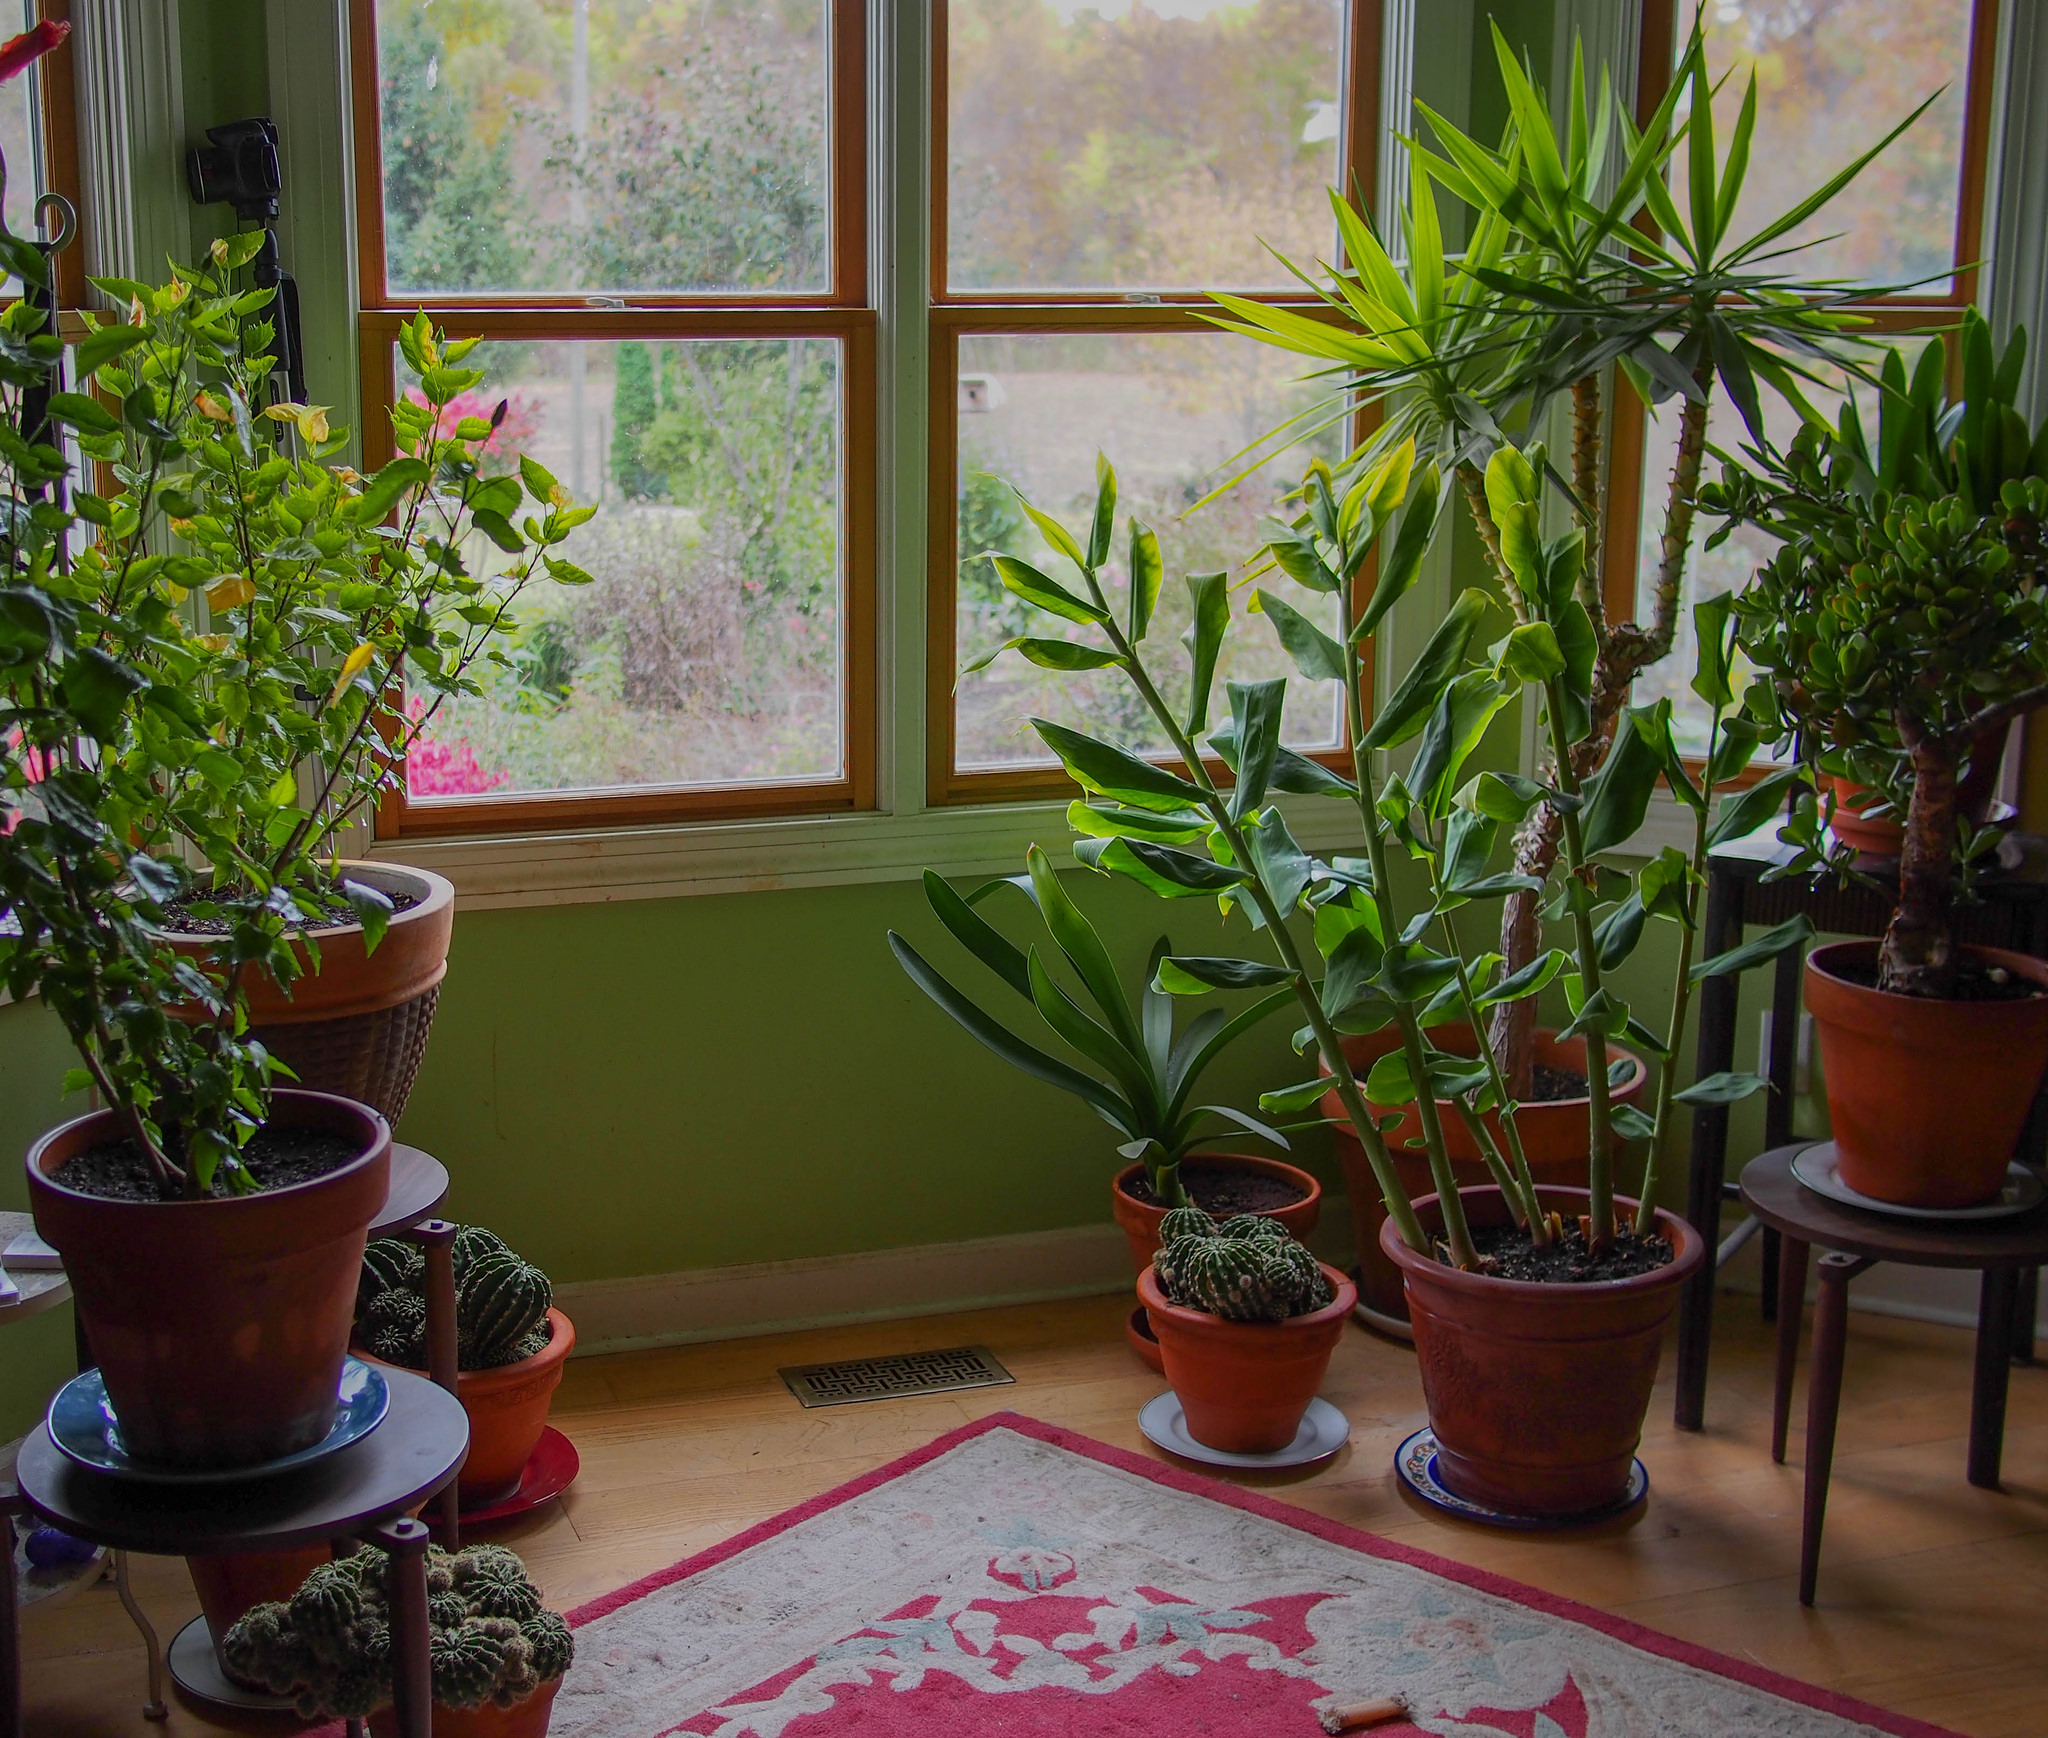 10 Easy Ways to Make Your Home More Eco-Friendly